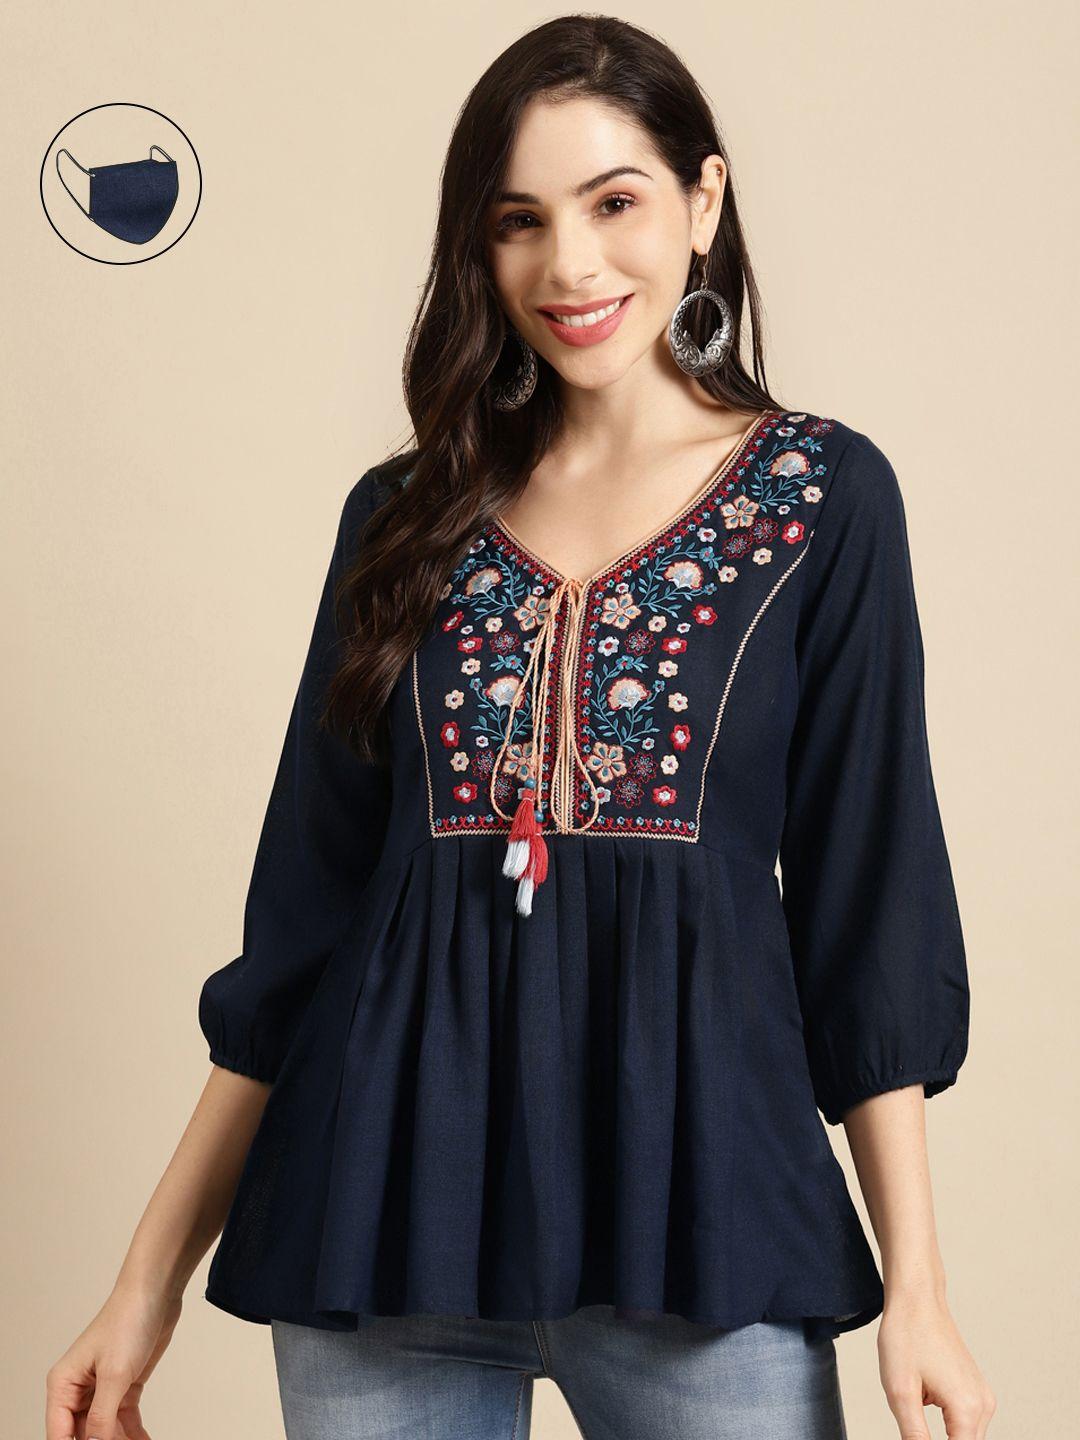 rangmayee-navy-blue-ethnic-motifs-embroidered-tunic-with-mask